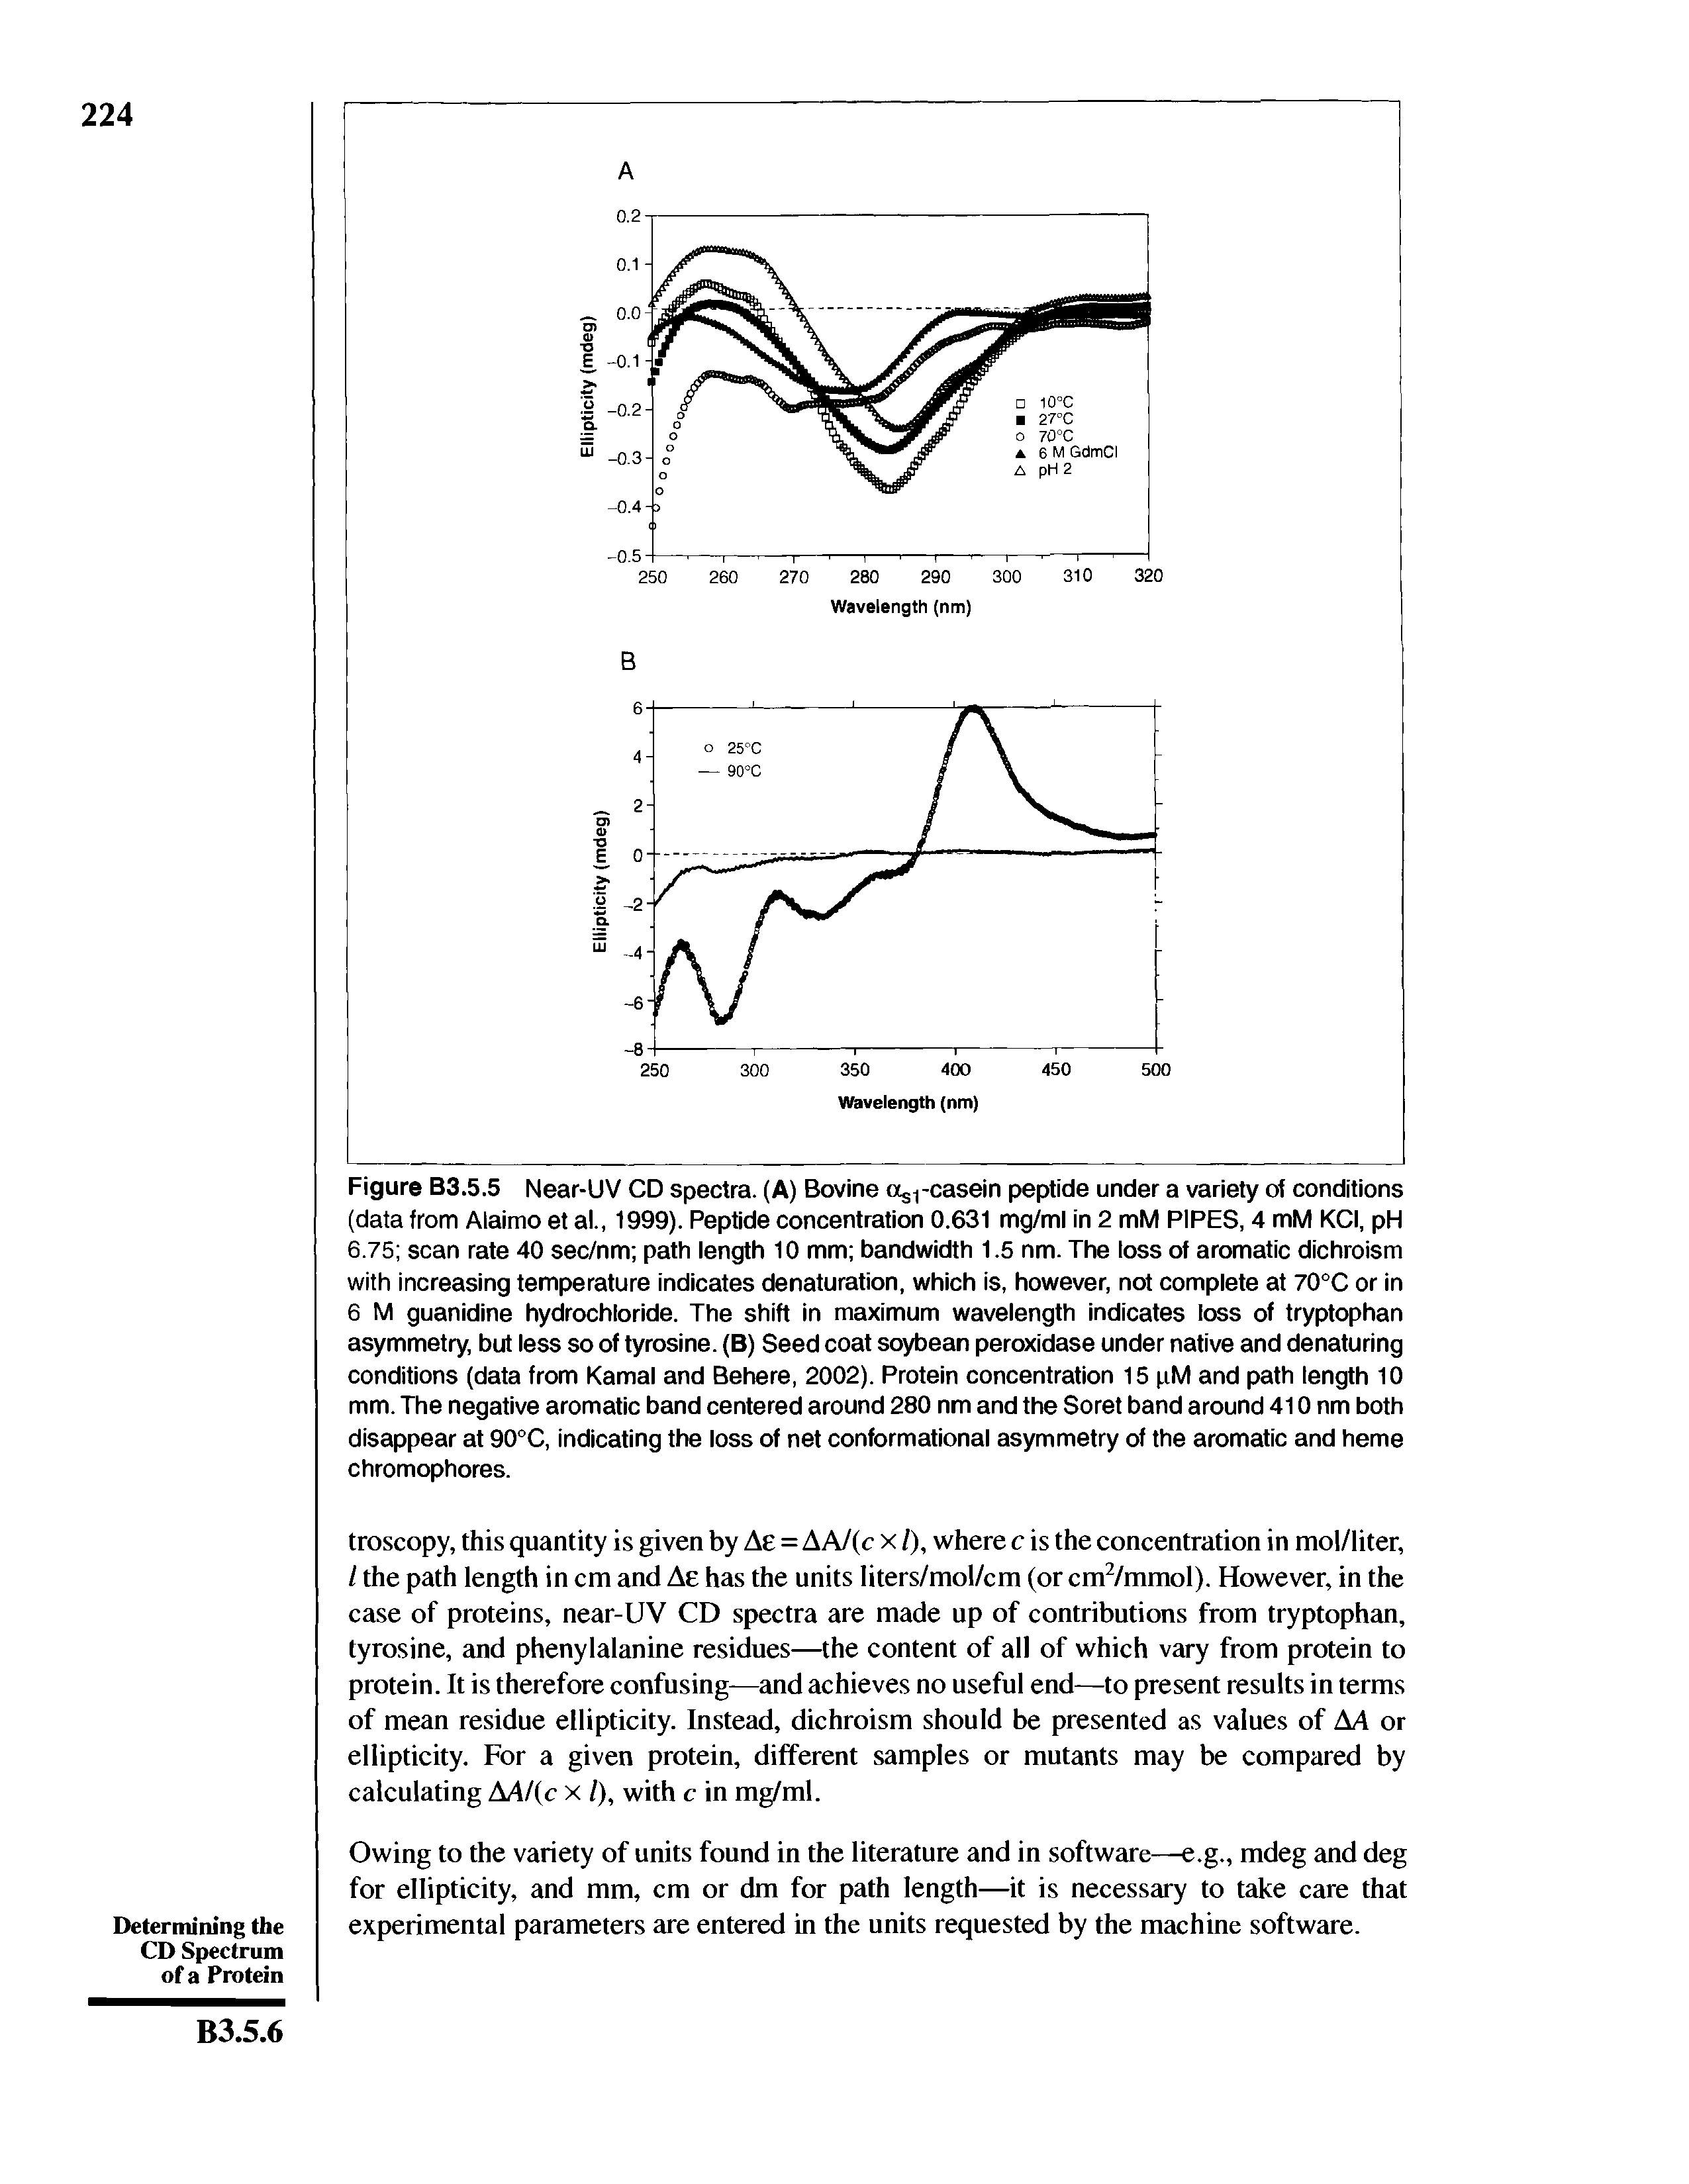 Figure B3.5.5 Near-UV CD spectra. (A) Bovine a -casein peptide under a variety of conditions (data from Alaimo et al., 1999). Peptide concentration 0.631 mg/ml in 2 mM PIPES, 4 mM KCI, pH 6.75 scan rate 40 sec/nm path length 10 mm bandwidth 1.5 nm. The loss of aromatic dichroism with increasing temperature indicates denaturation, which is, however, not complete at 70°C or in 6 M guanidine hydrochloride. The shift in maximum wavelength indicates loss of tryptophan asymmetry, but less so of tyrosine. (B) Seed coat soybean peroxidase under native and denaturing conditions (data from Kamal and Behere, 2002). Protein concentration 15 pM and path length 10 mm. The negative aromatic band centered around 280 nm and the Soret band around 410 nm both disappear at 90°C, indicating the loss of net conformational asymmetry of the aromatic and heme chromophores.